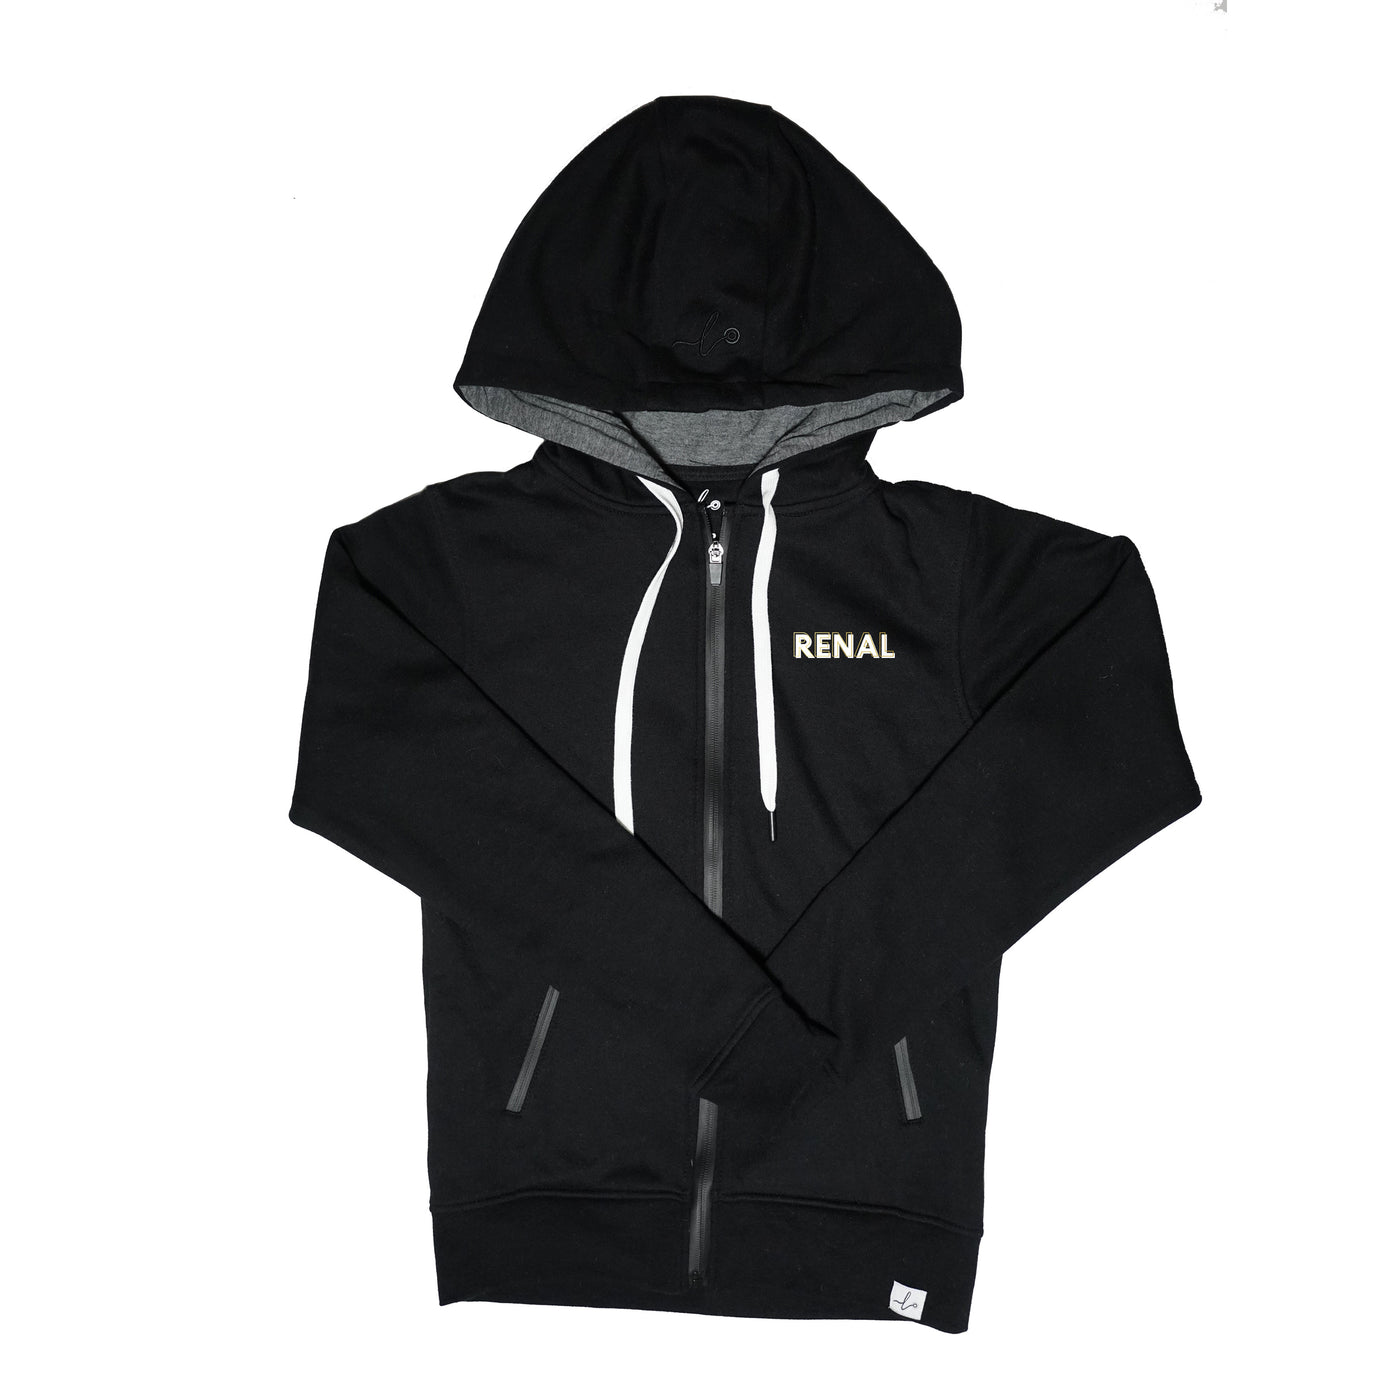 Renal Creds - PRN Lux Hoodie